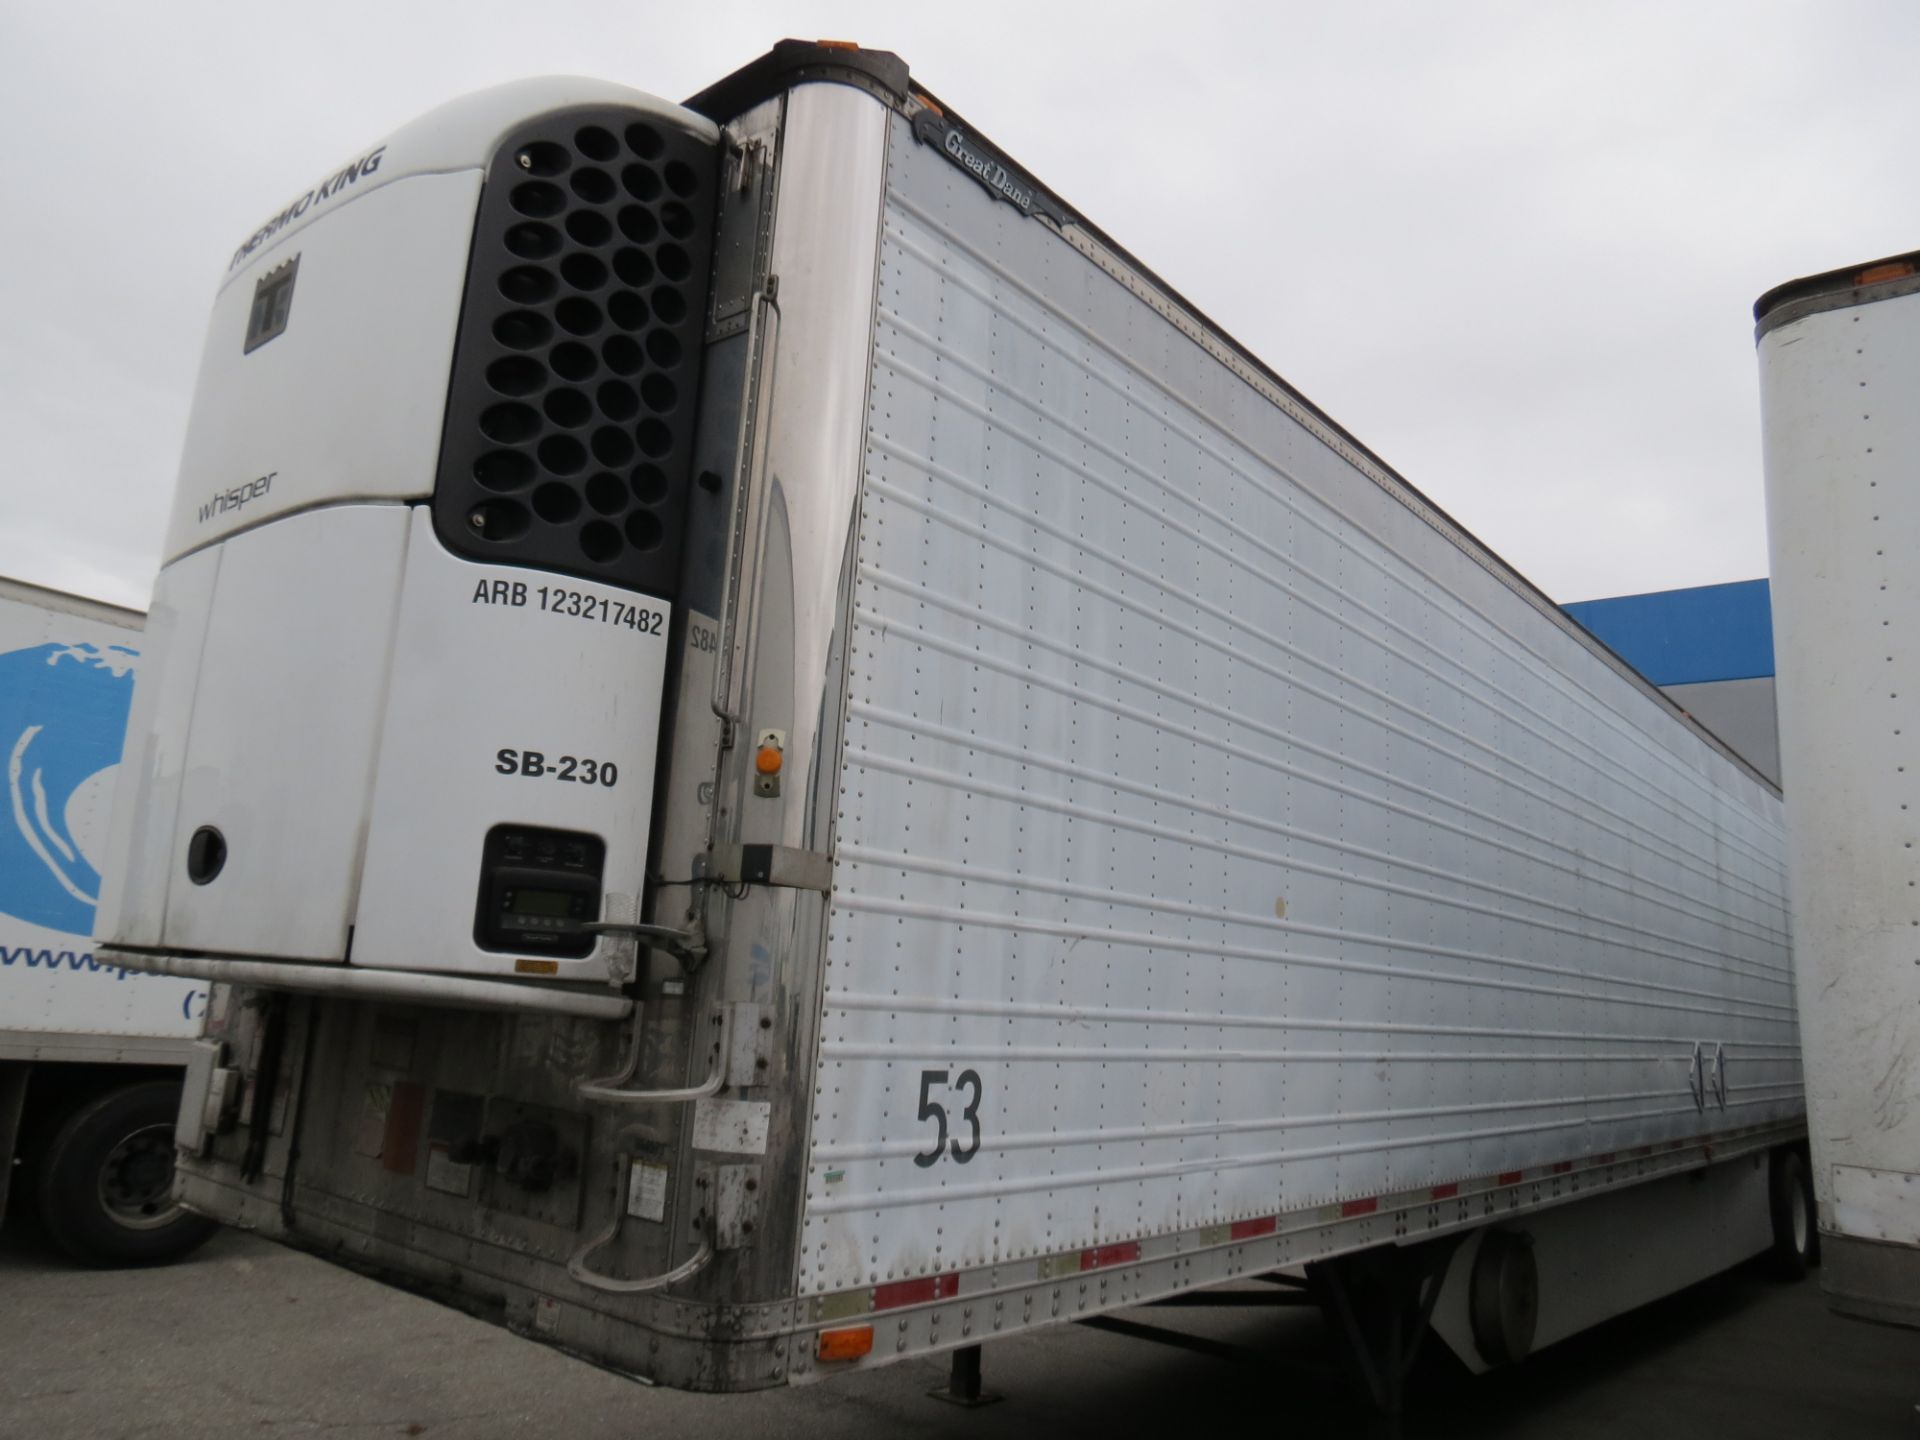 1998 Great Dane 53' Thermo King Smart Reefer #3 Trailer, VIN: 1GRAAD626WW072309, LIC: 4MJ2287 - Image 3 of 6